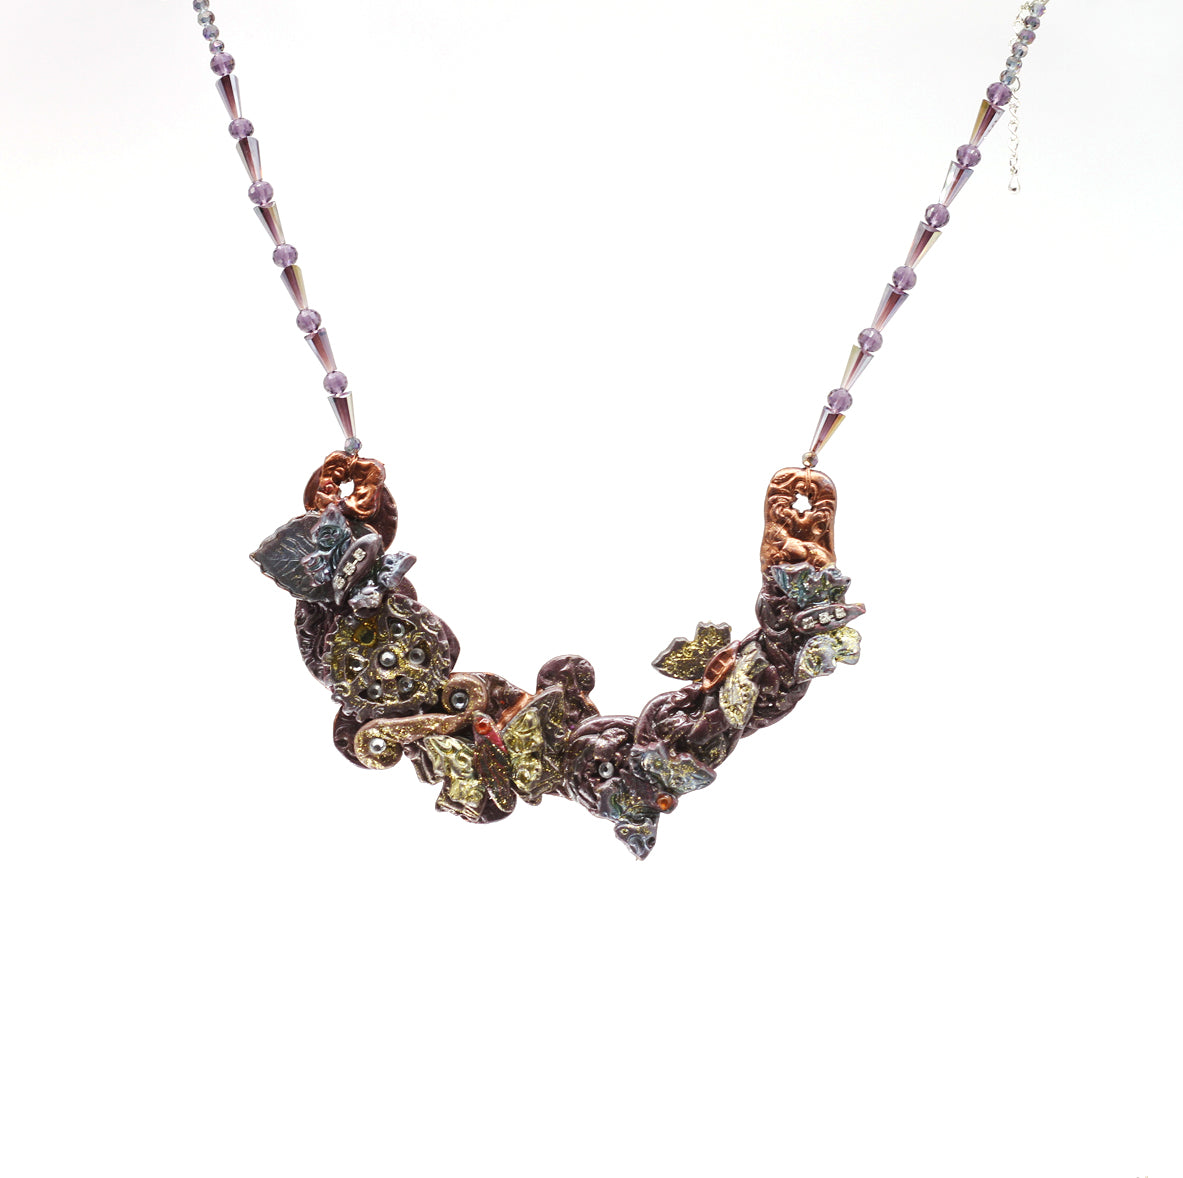 Steampunk Inspired Necklace - Statement Necklace